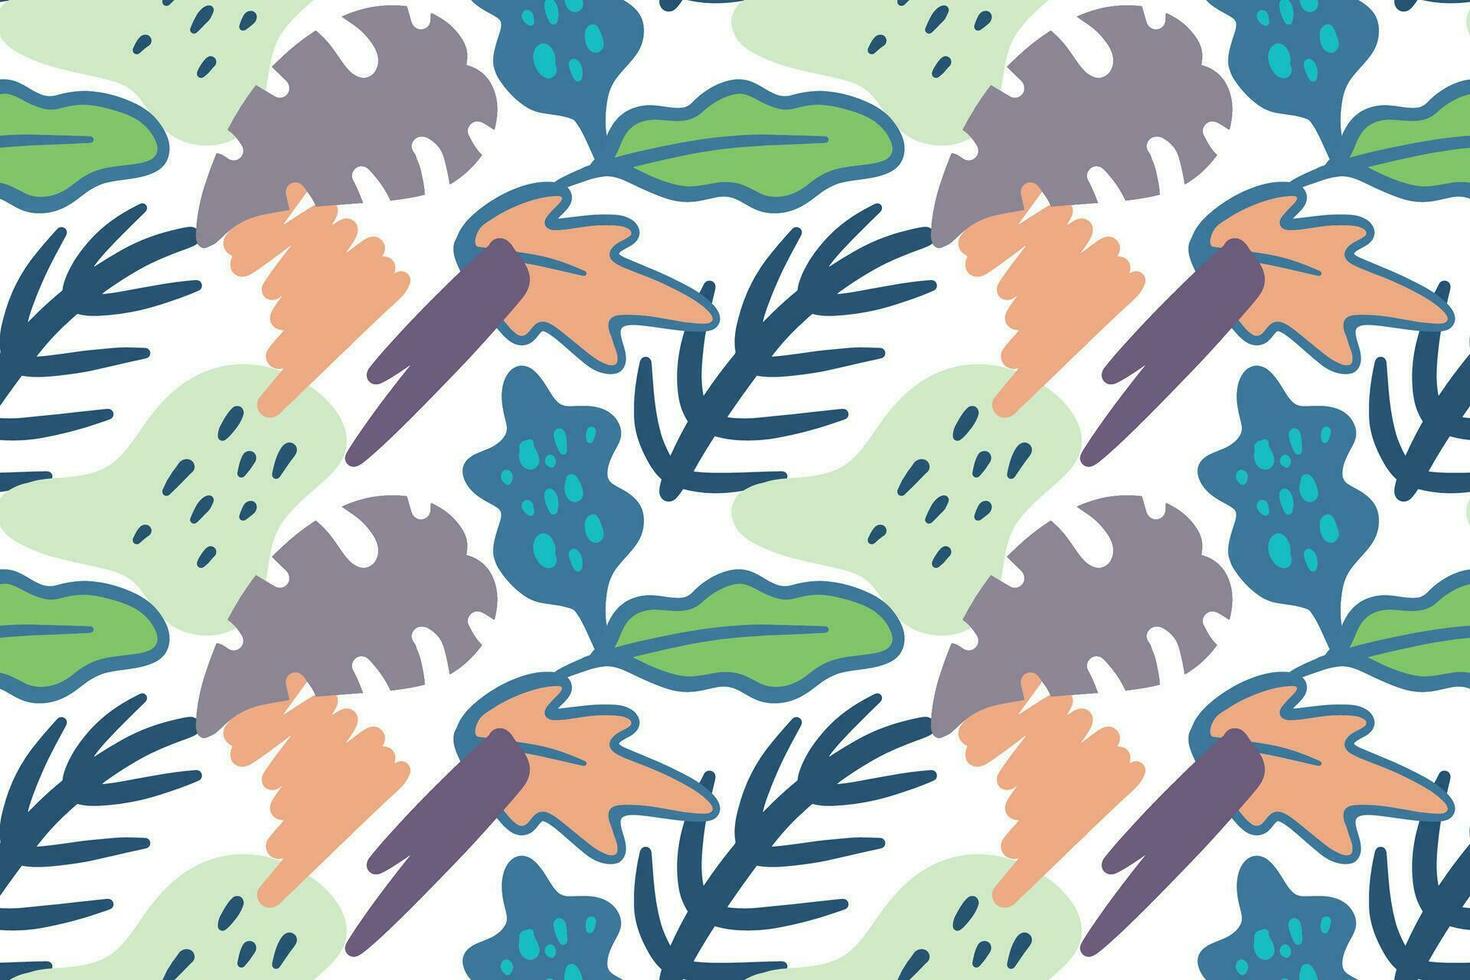 Hand drawn tropical jungle plants with abstract shapes seamless pattern design vector